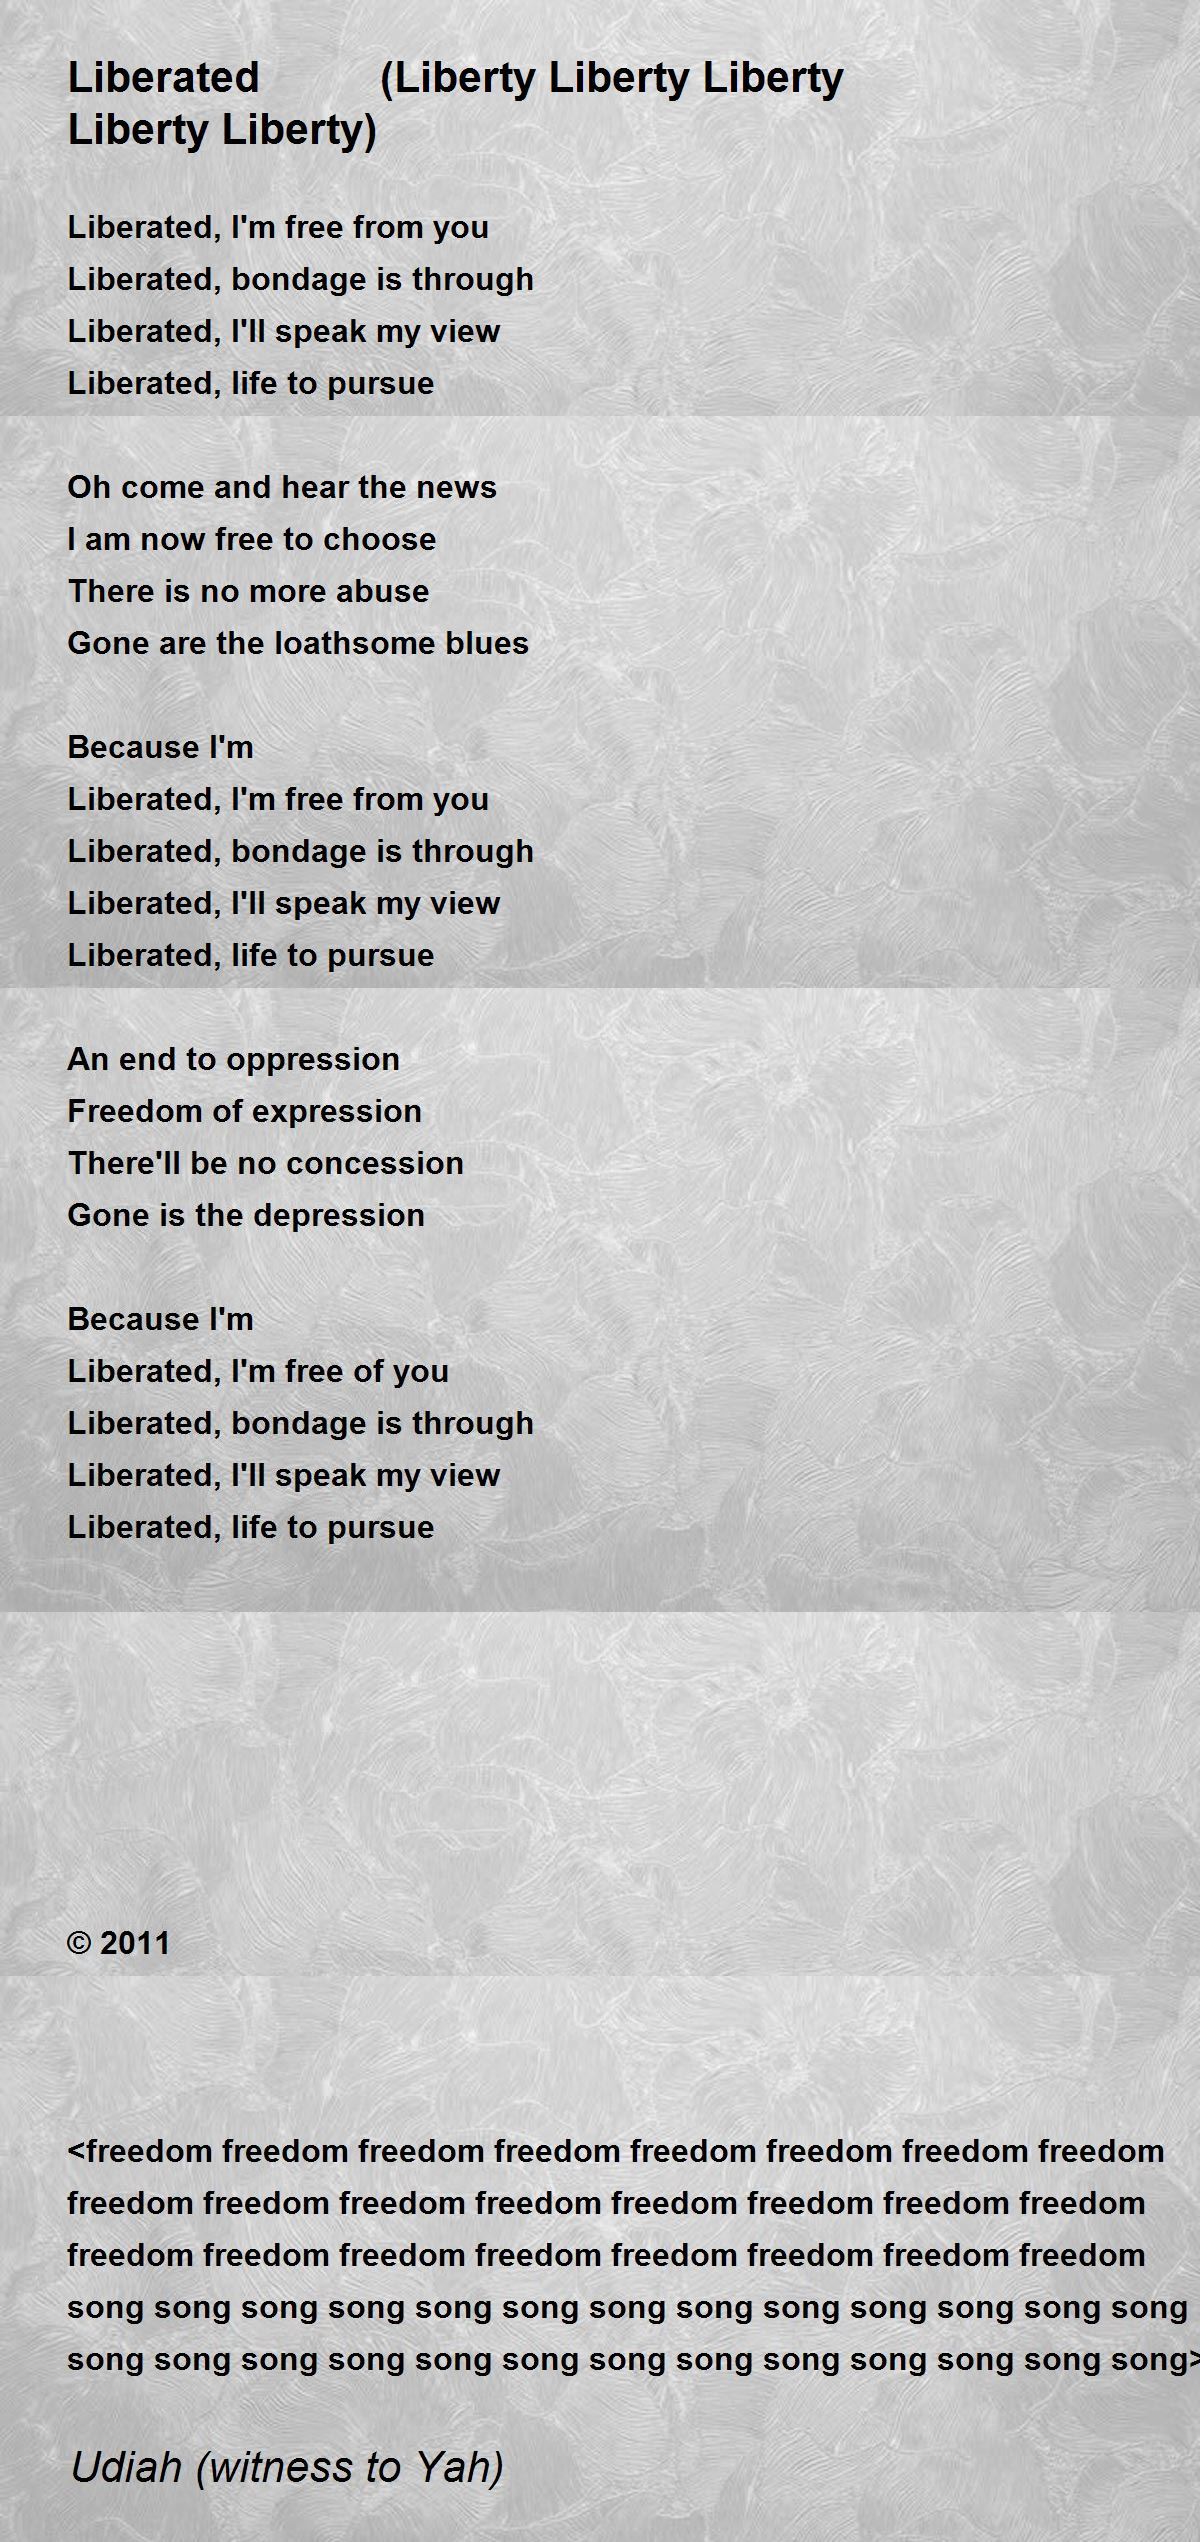 Just Get Over It (Depression Depression Depression Depression) - Just Get  Over It (Depression Depression Depression Depression) Poem by Udiah  (witness to Yah)